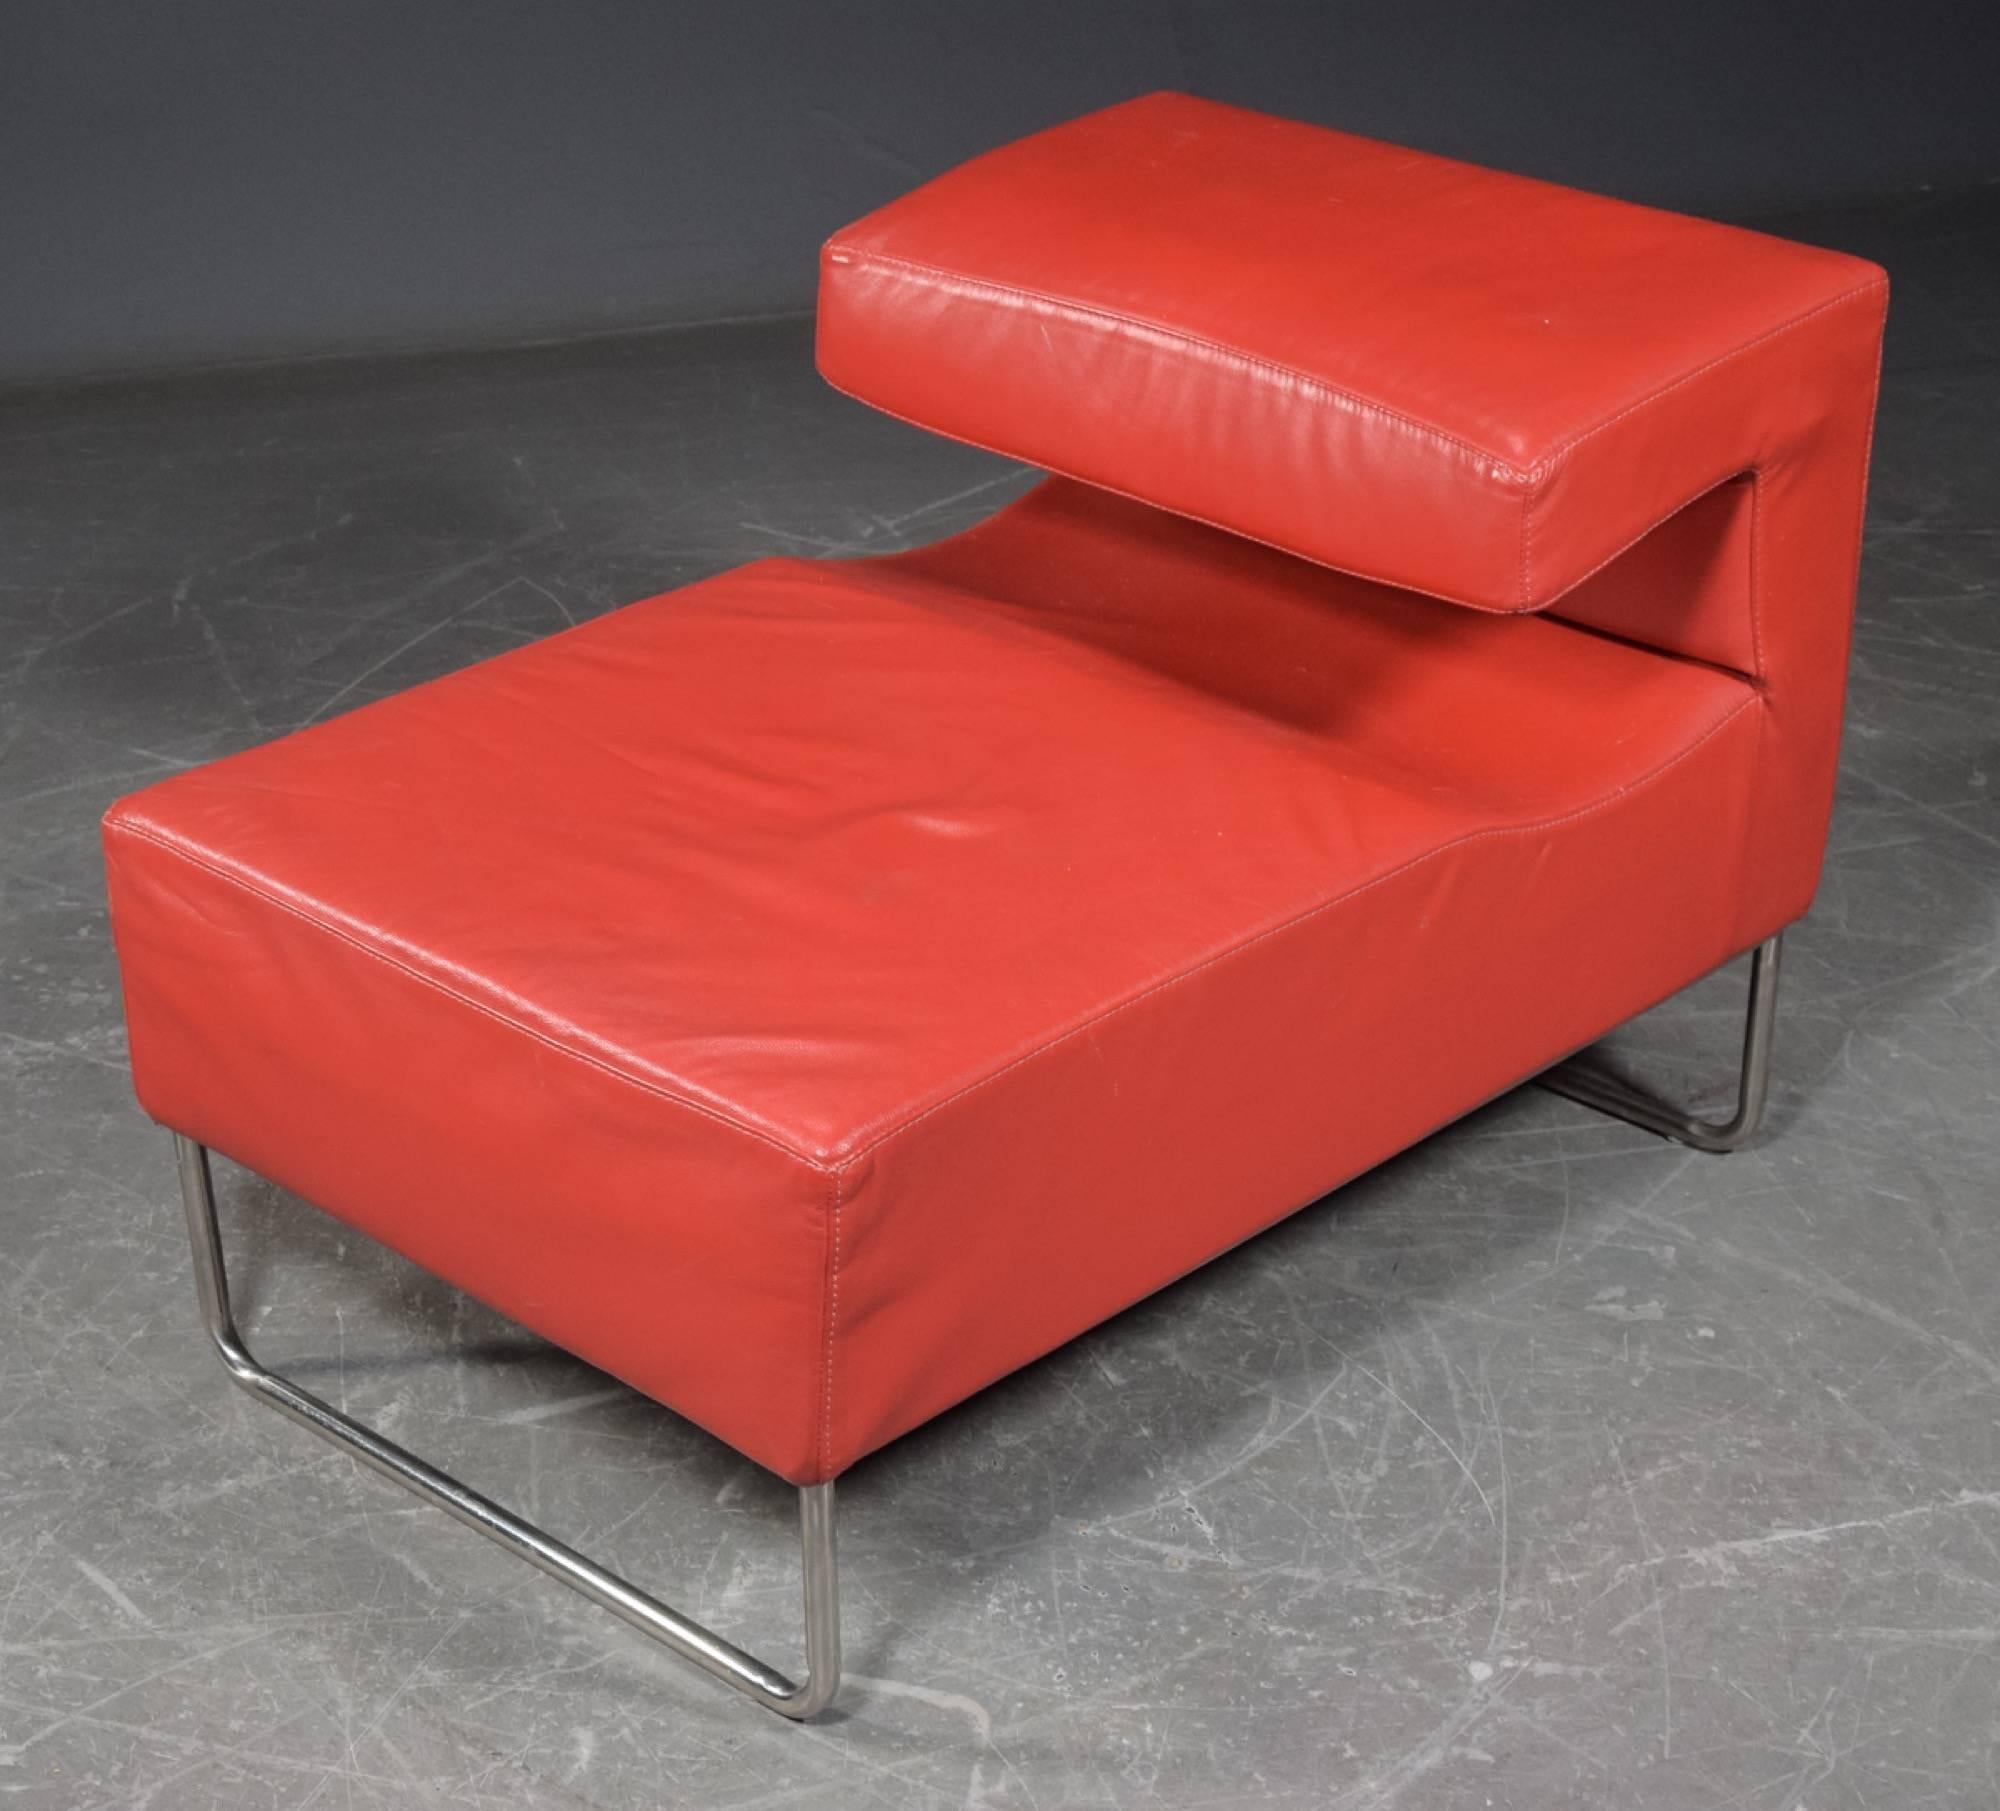 Chaise longue chair upholstered with red faux leather on a chromed steel frame.